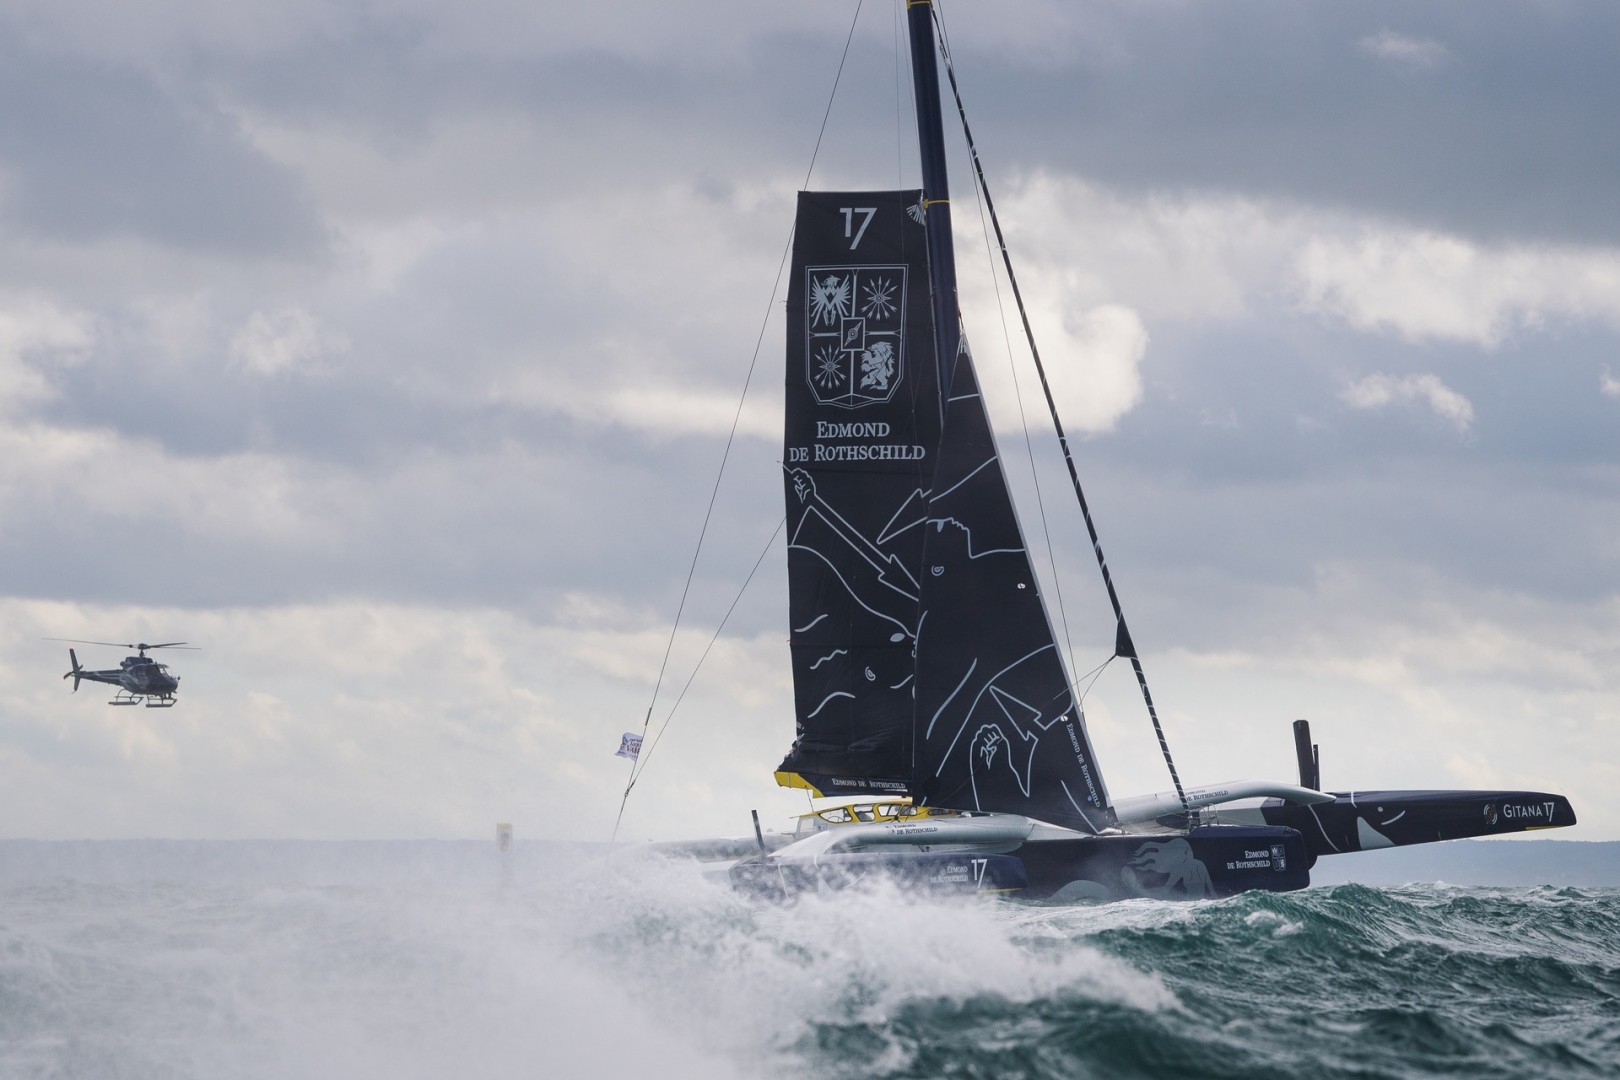 TJV: Imoca Speed tests in the trade winds, options ahead